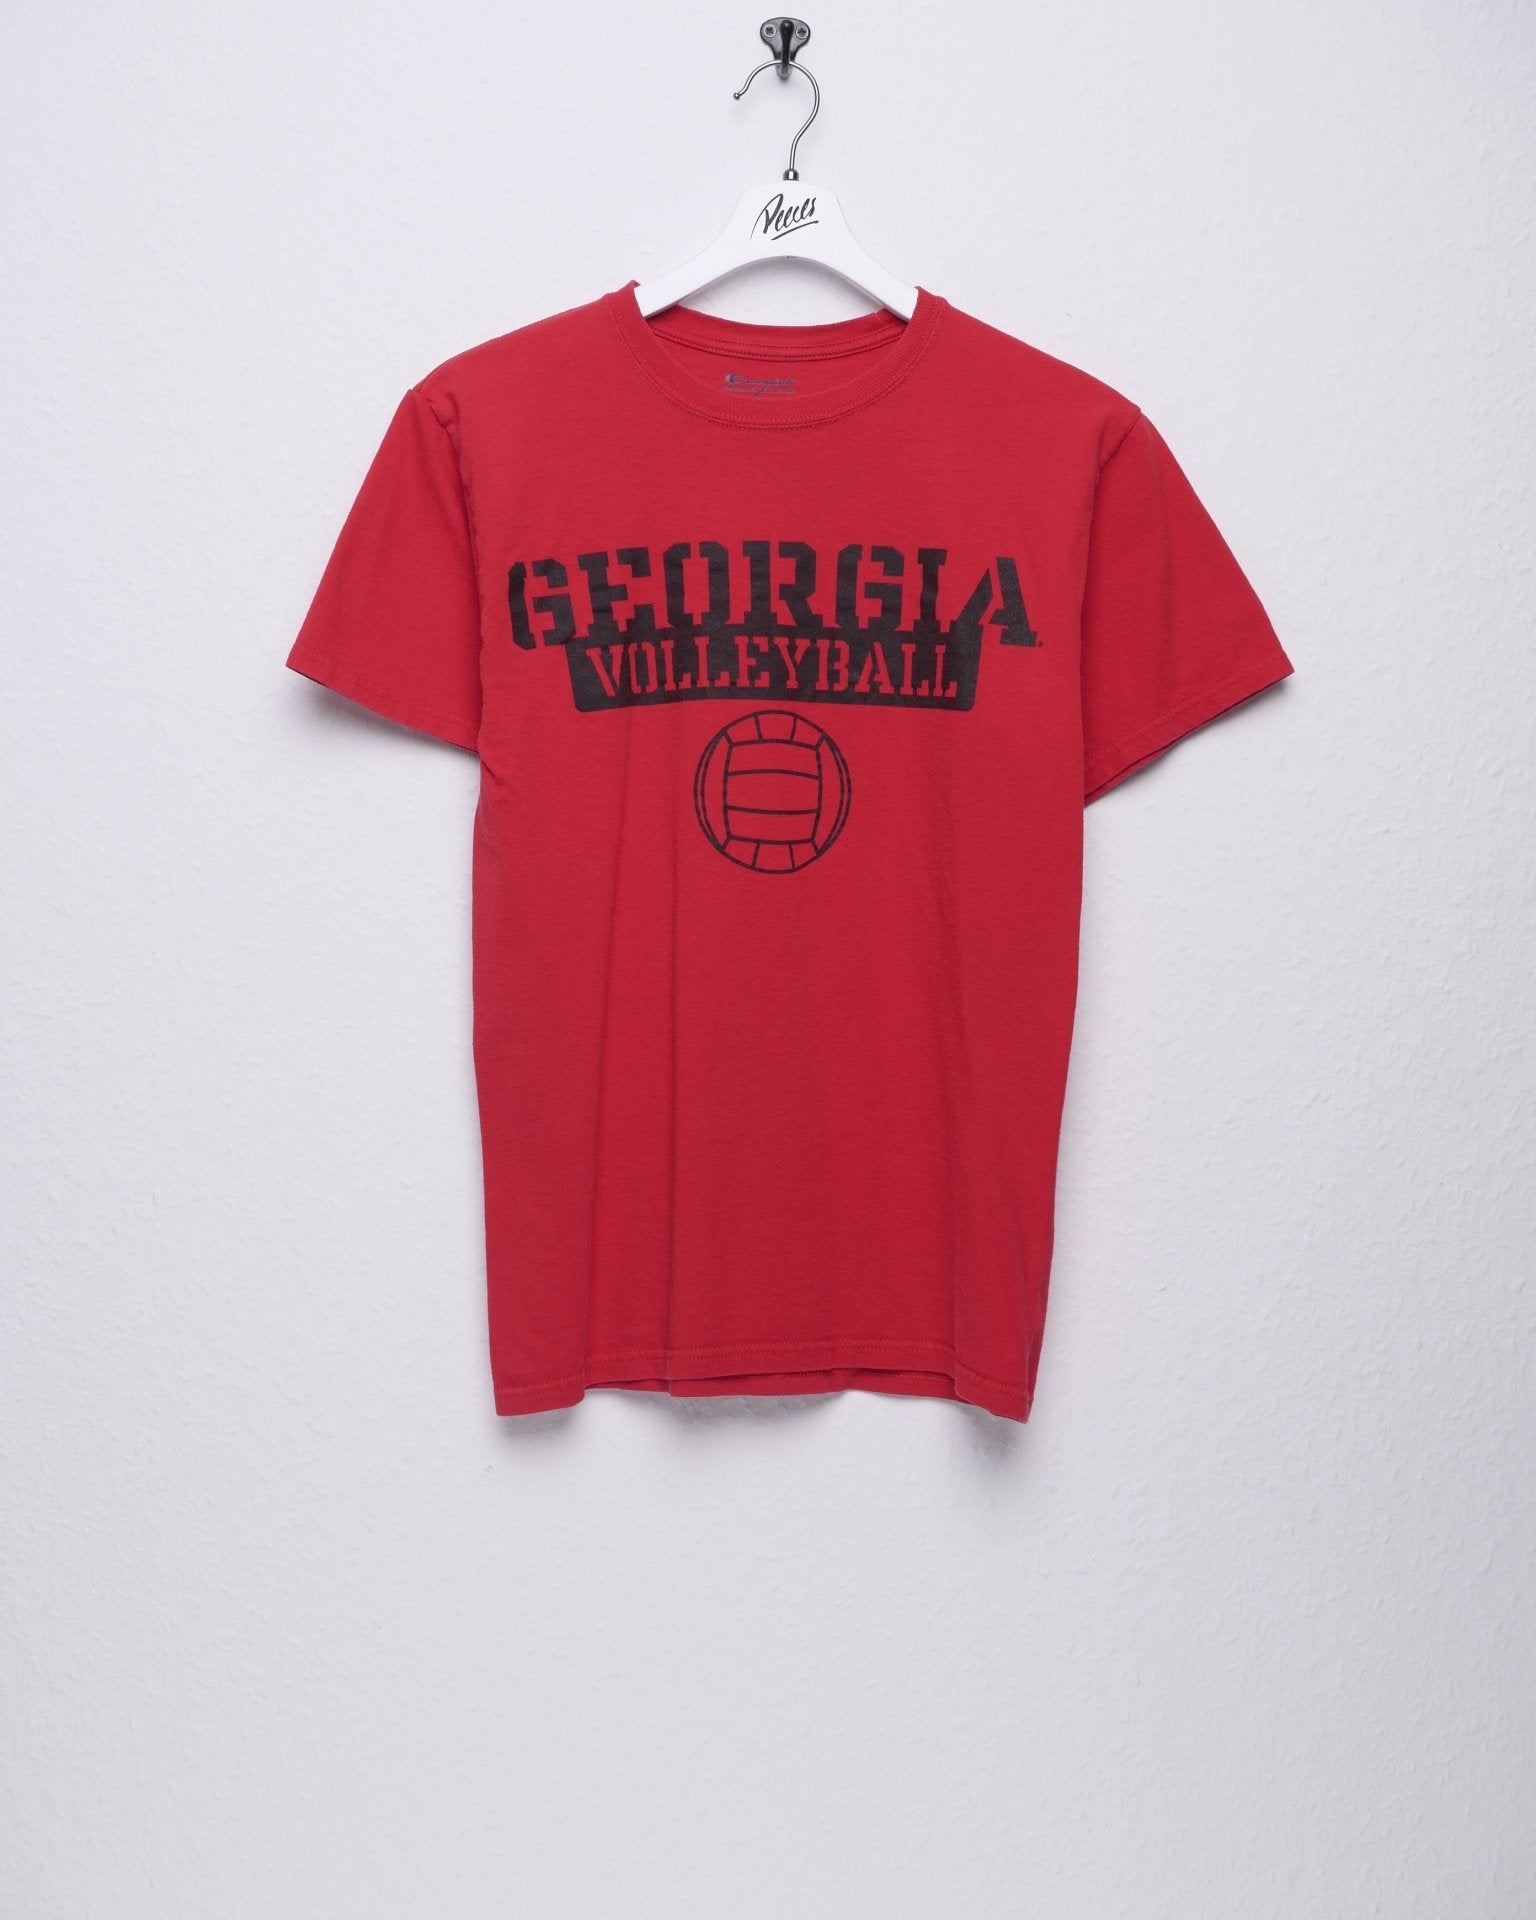 Champion 'Georgia Volleyball' printed Spellout red Shirt - Peeces